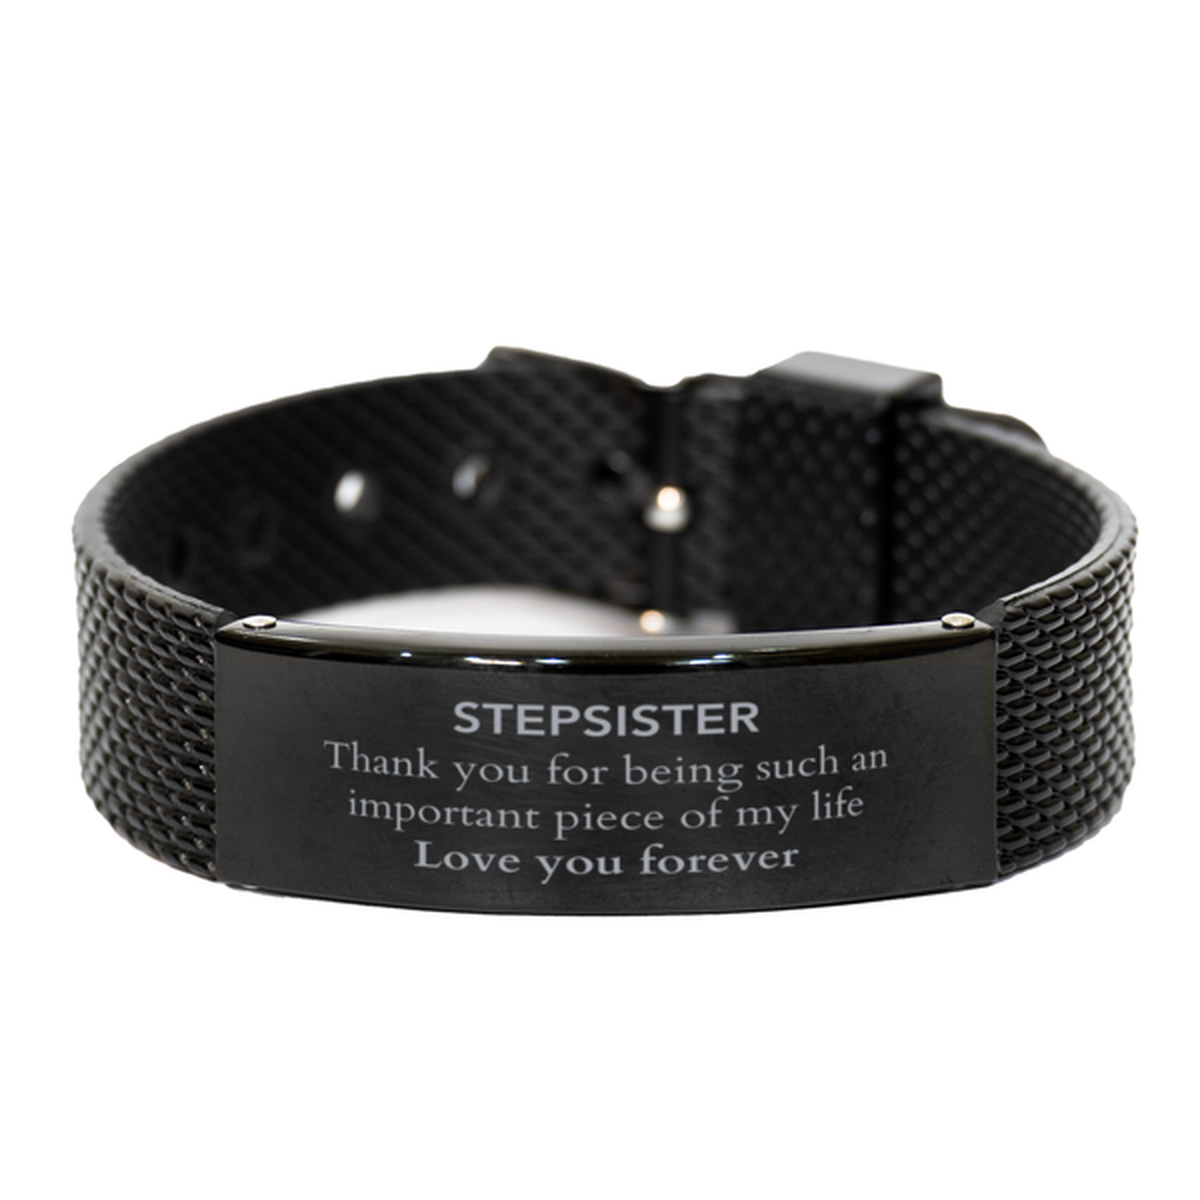 Appropriate Stepsister Black Shark Mesh Bracelet Epic Birthday Gifts for Stepsister Thank you for being such an important piece of my life Stepsister Christmas Mothers Fathers Day